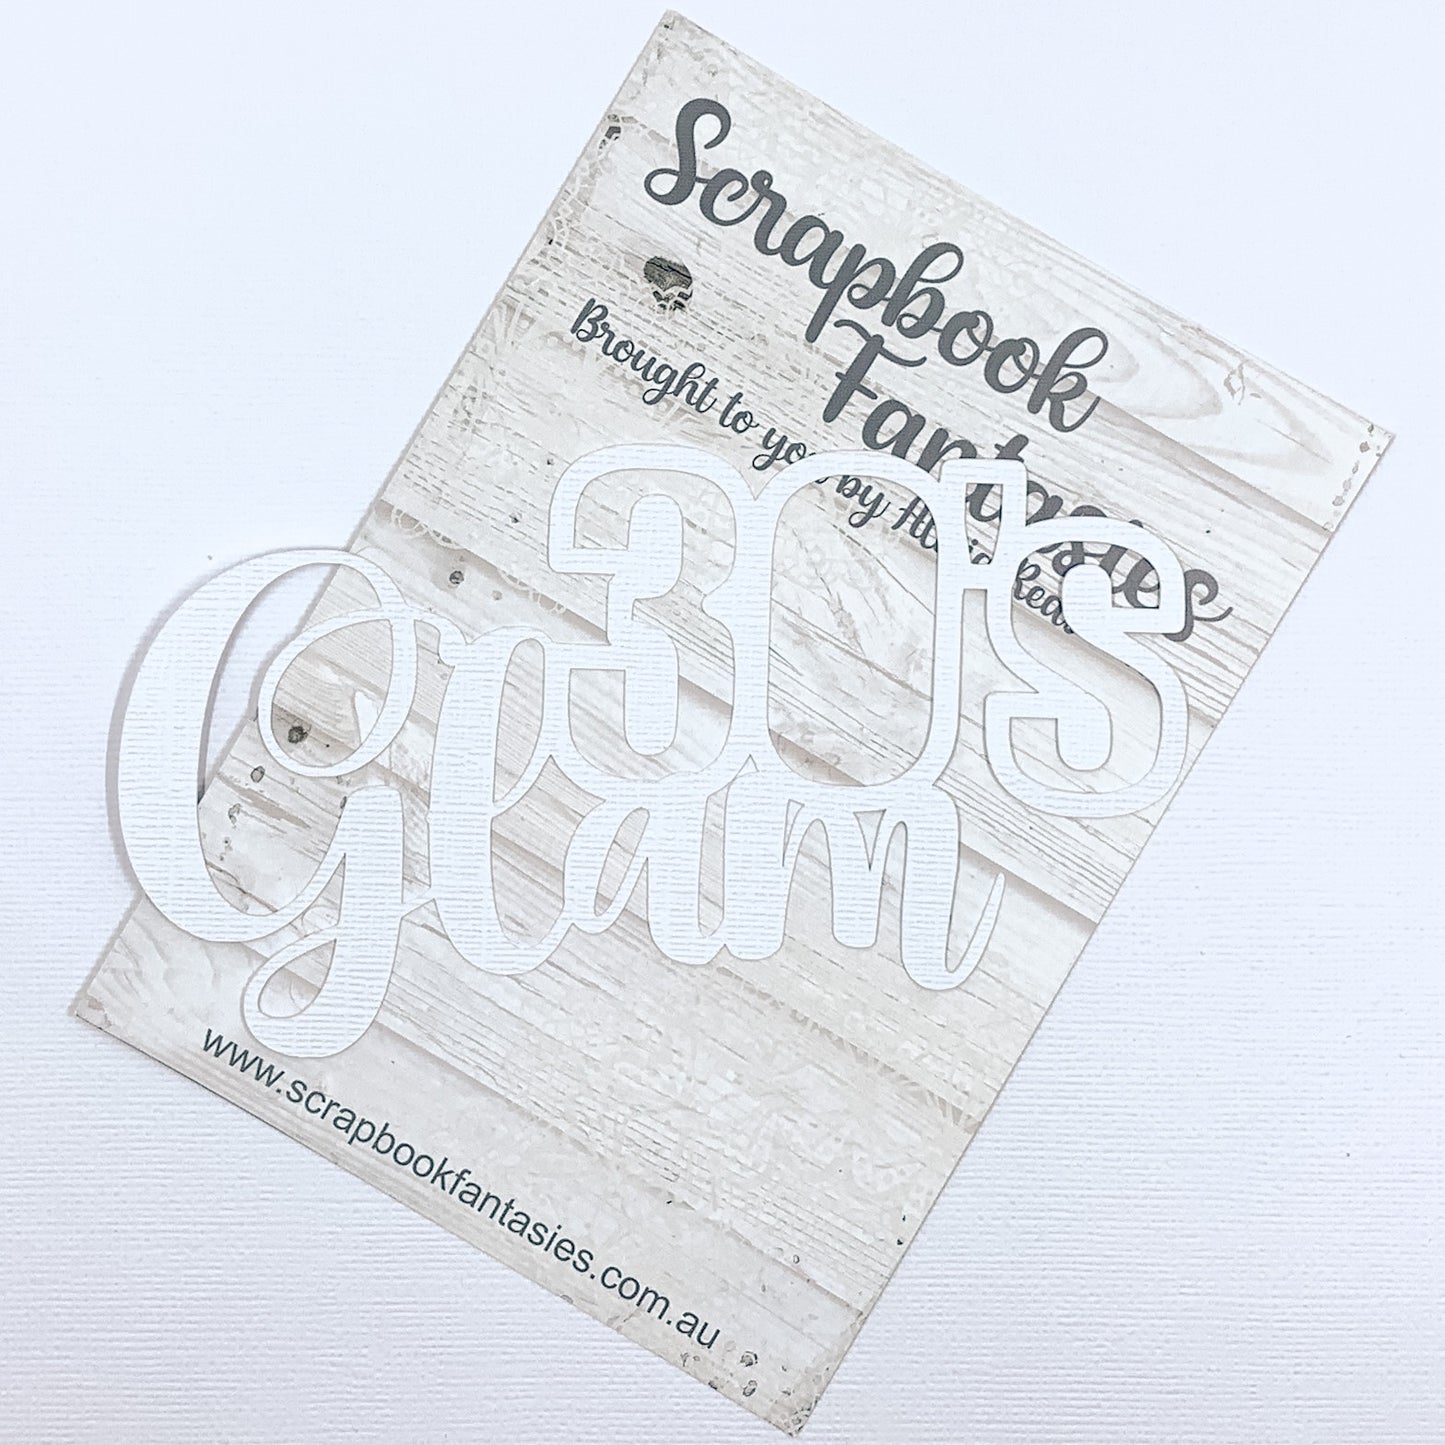 Glamorous - 30's Glam 3.5"x5.75" White Linen Cardstock Title-Cut - Designed by Alicia Redshaw